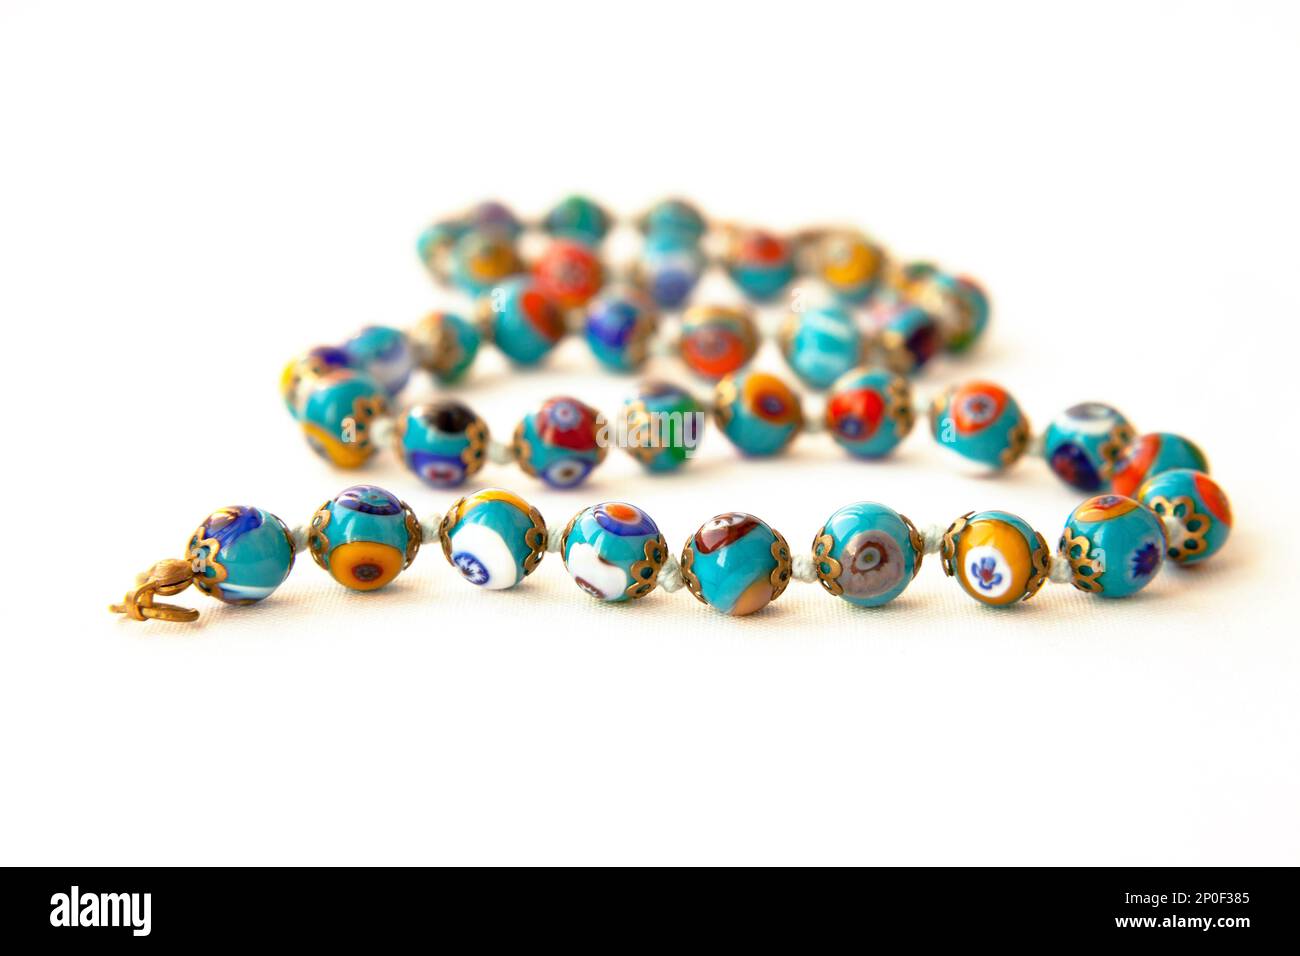 Original Murano glass beads with floral pattern necklace isolated. Venetian traditional colorful millefiori glass jewelry. String of blue  beads, focu Stock Photo